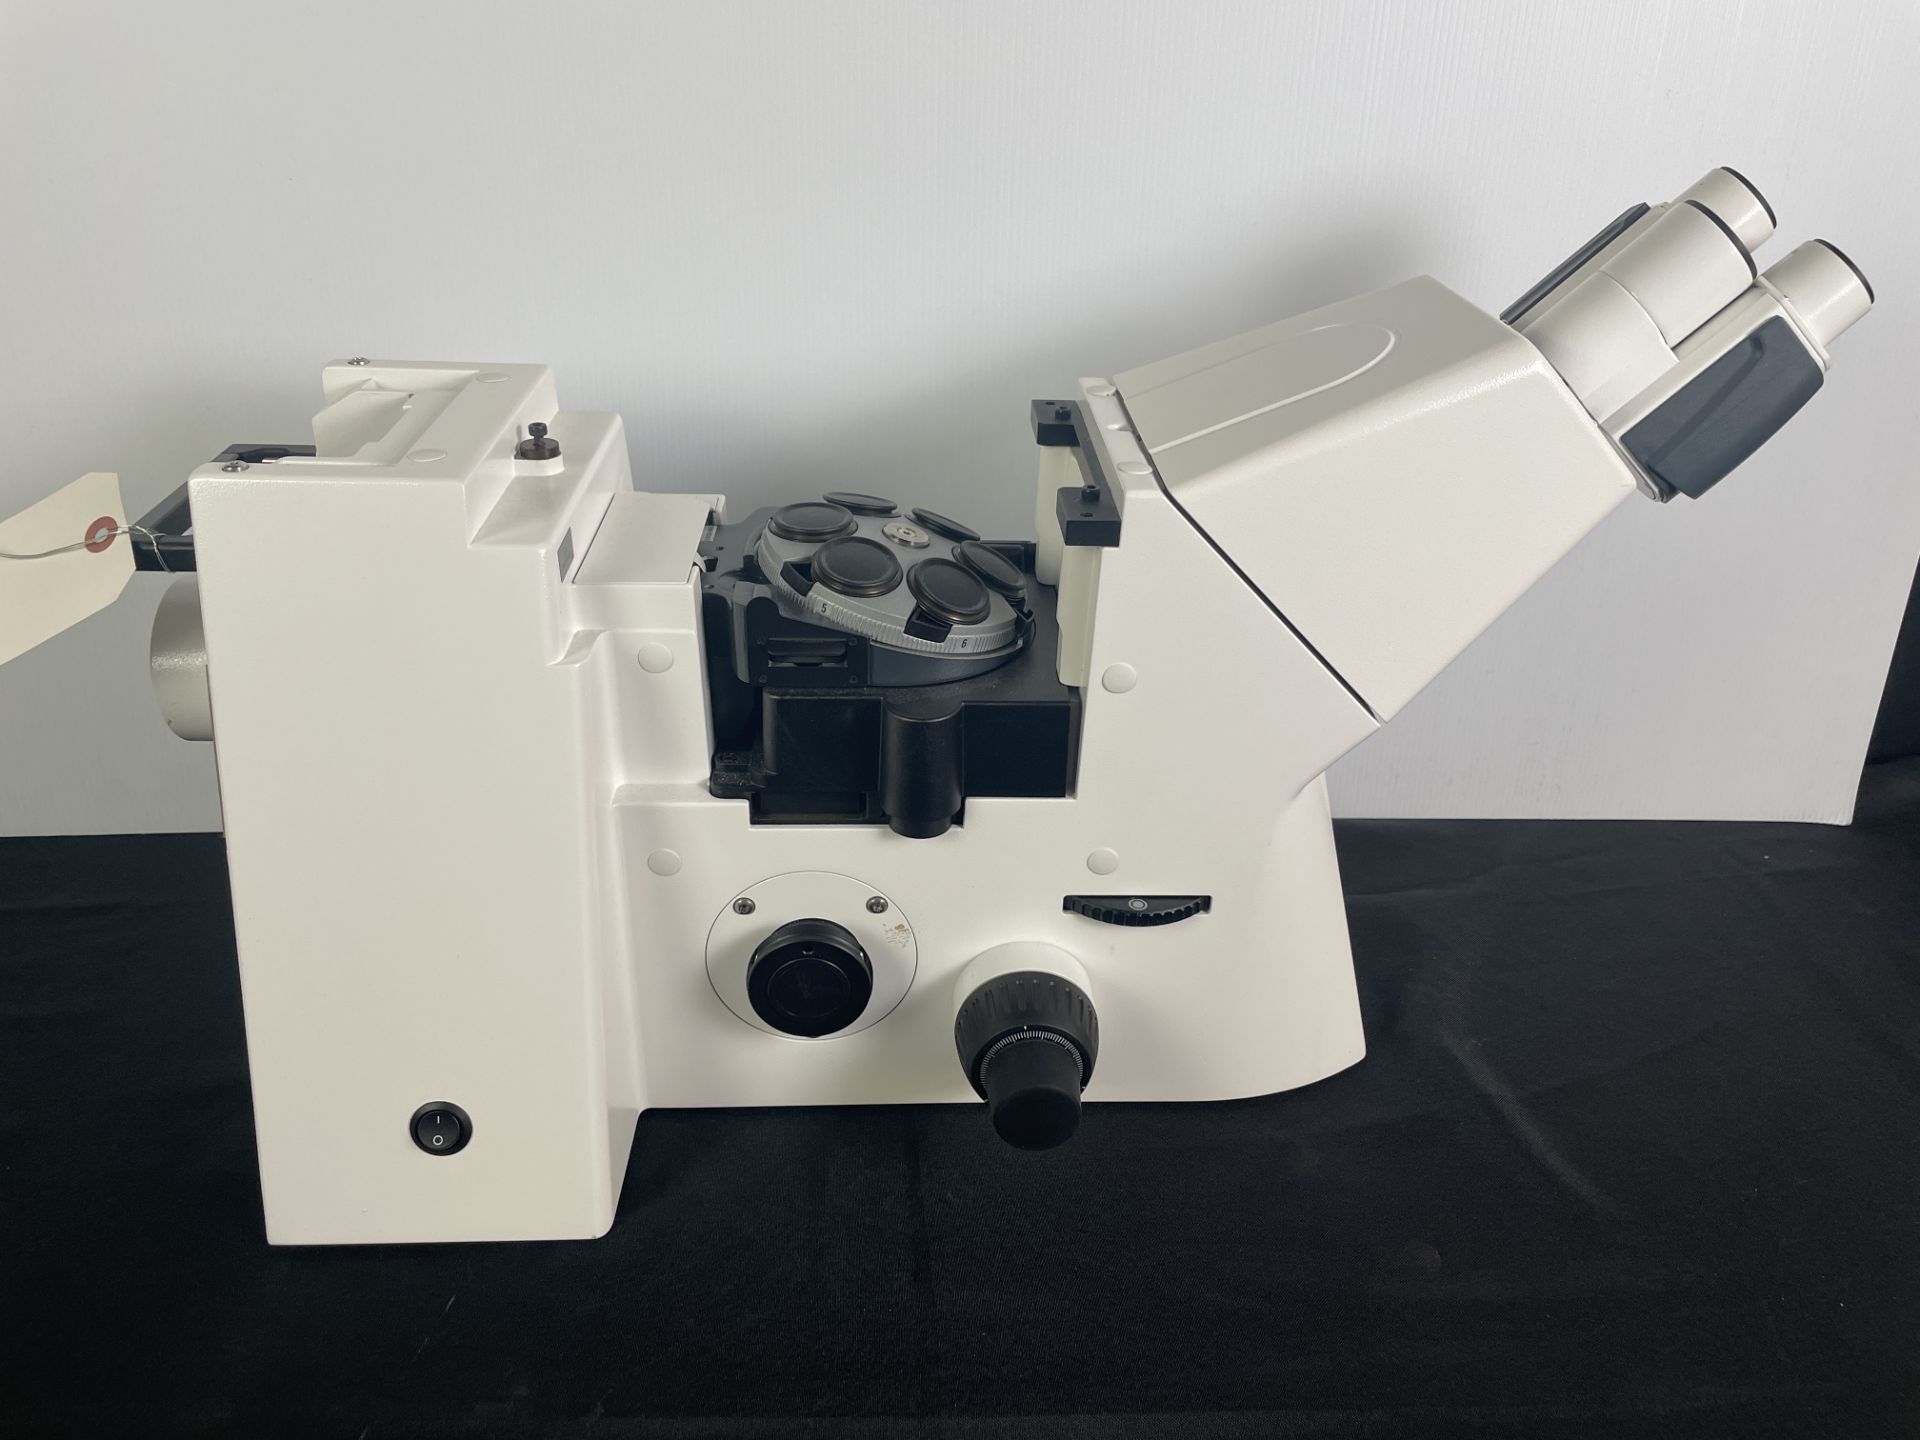 Zeiss Axio Observer 3 Inverted Microscope w/(4) Optics & (2) Zeiss Eyepieces #PI 10x/23 S/N: 386000 - Image 5 of 8